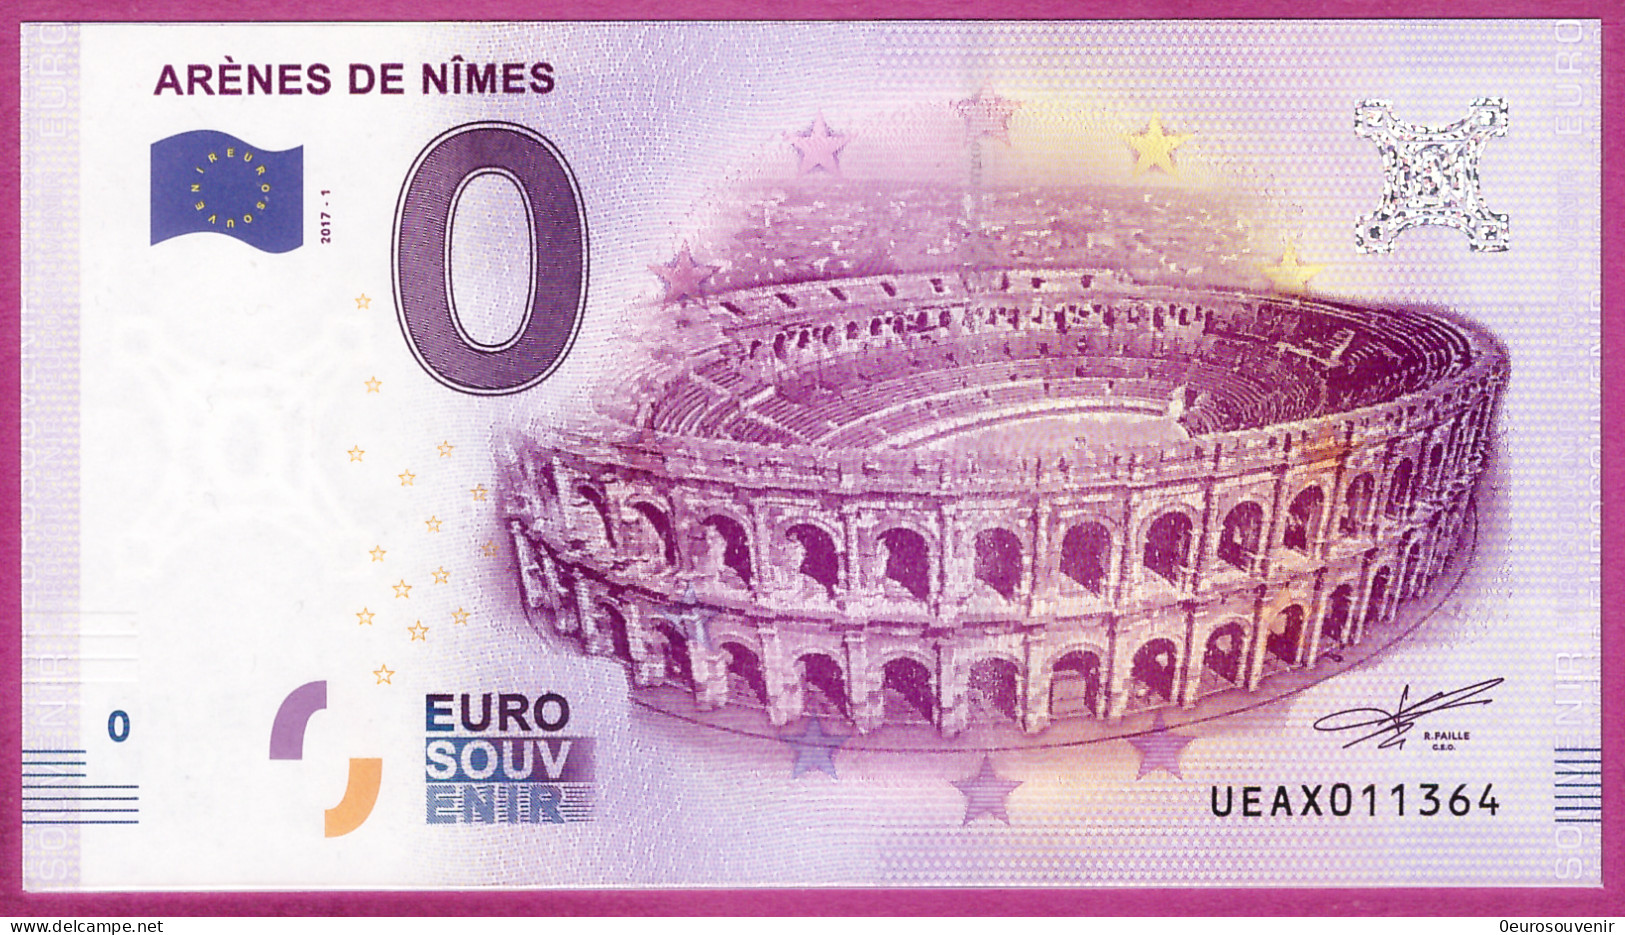 0-Euro UEAX 2017-1 ARENES DE NIMES S-11 XOX - Private Proofs / Unofficial